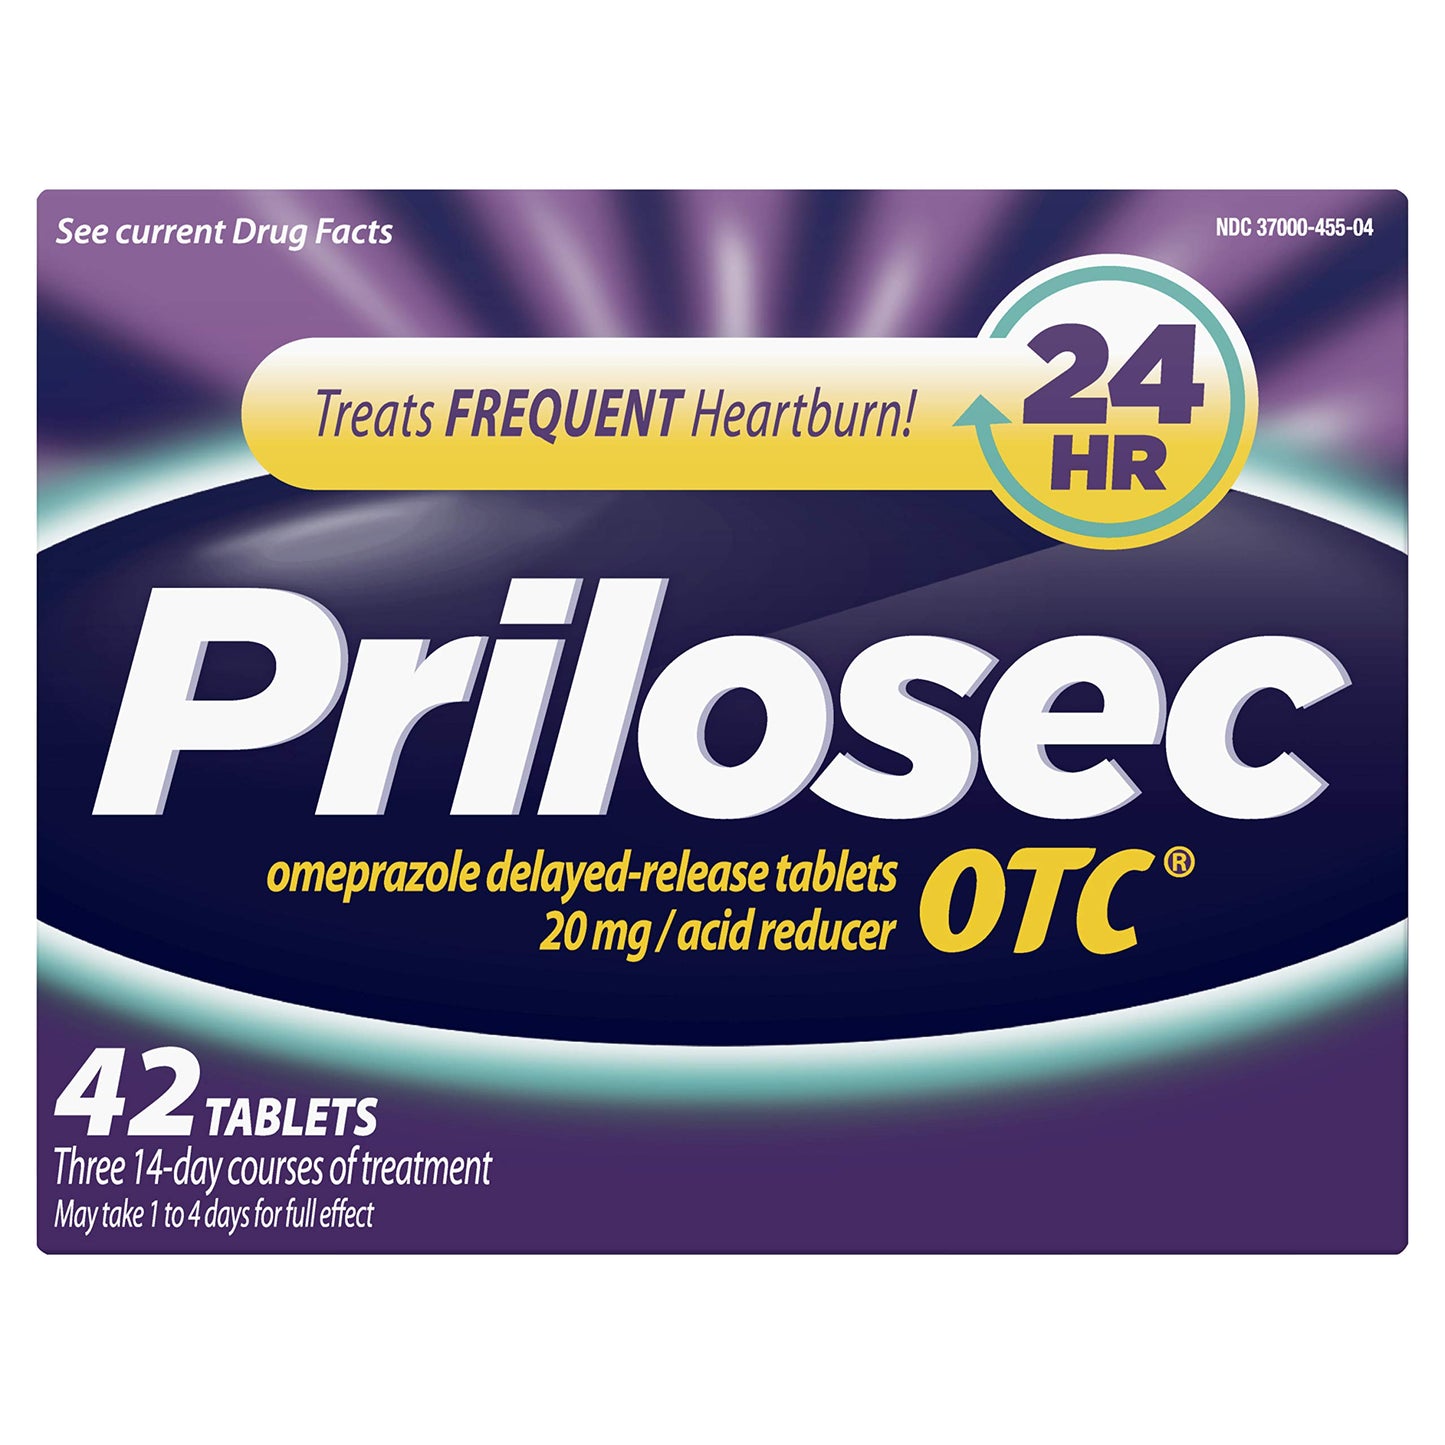 Prilosec OTC Frequent Heartburn Relief Medicine and Acid Reducer 42 Tablets Omeprazole Delayed-Release Tablets 20mg - Proton Pump Inhibitor (OLD)